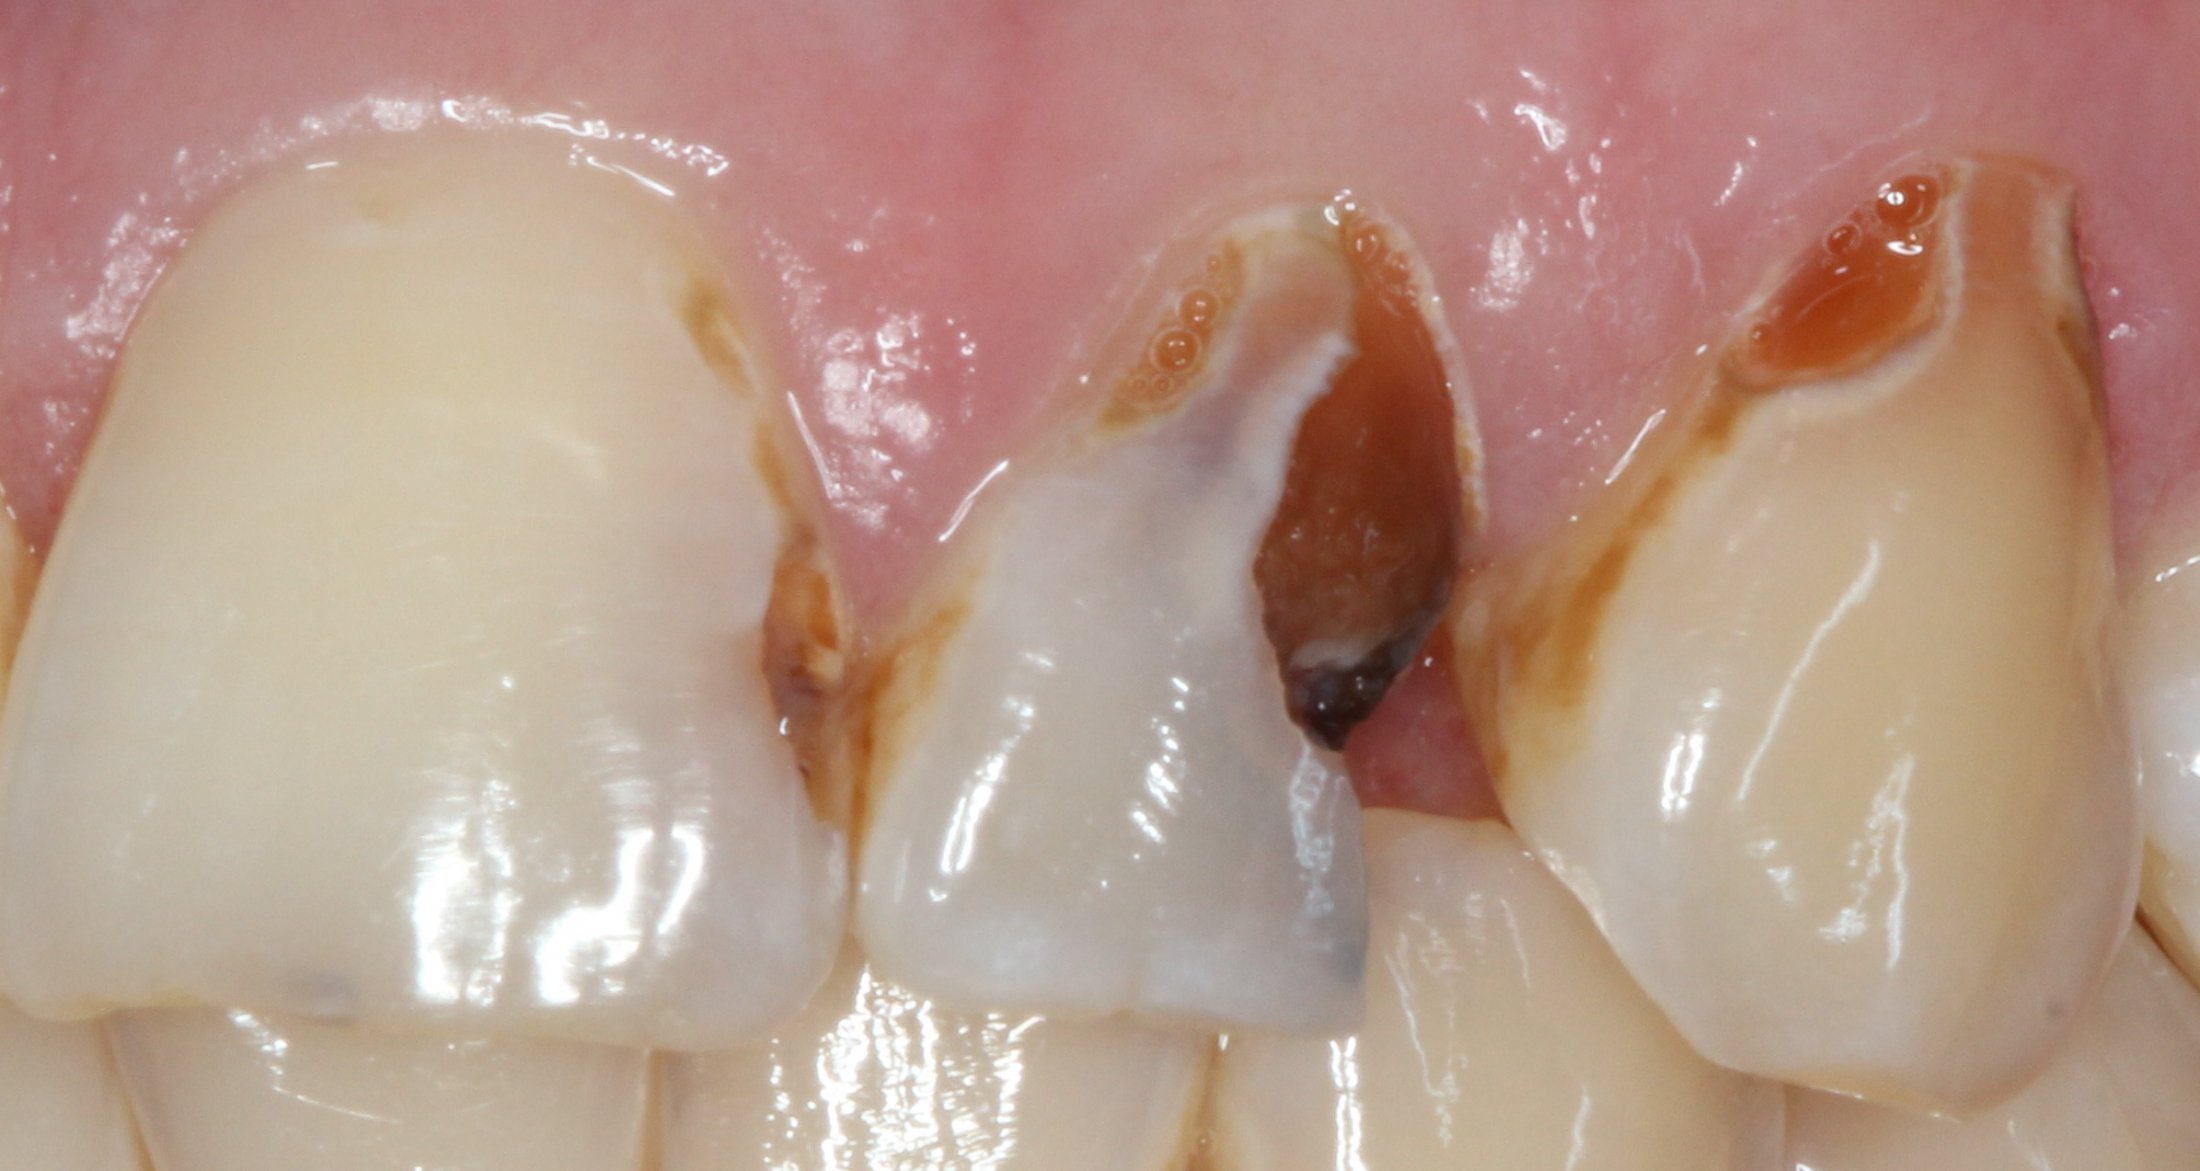 Patient's mouth before dental treatment on tooth